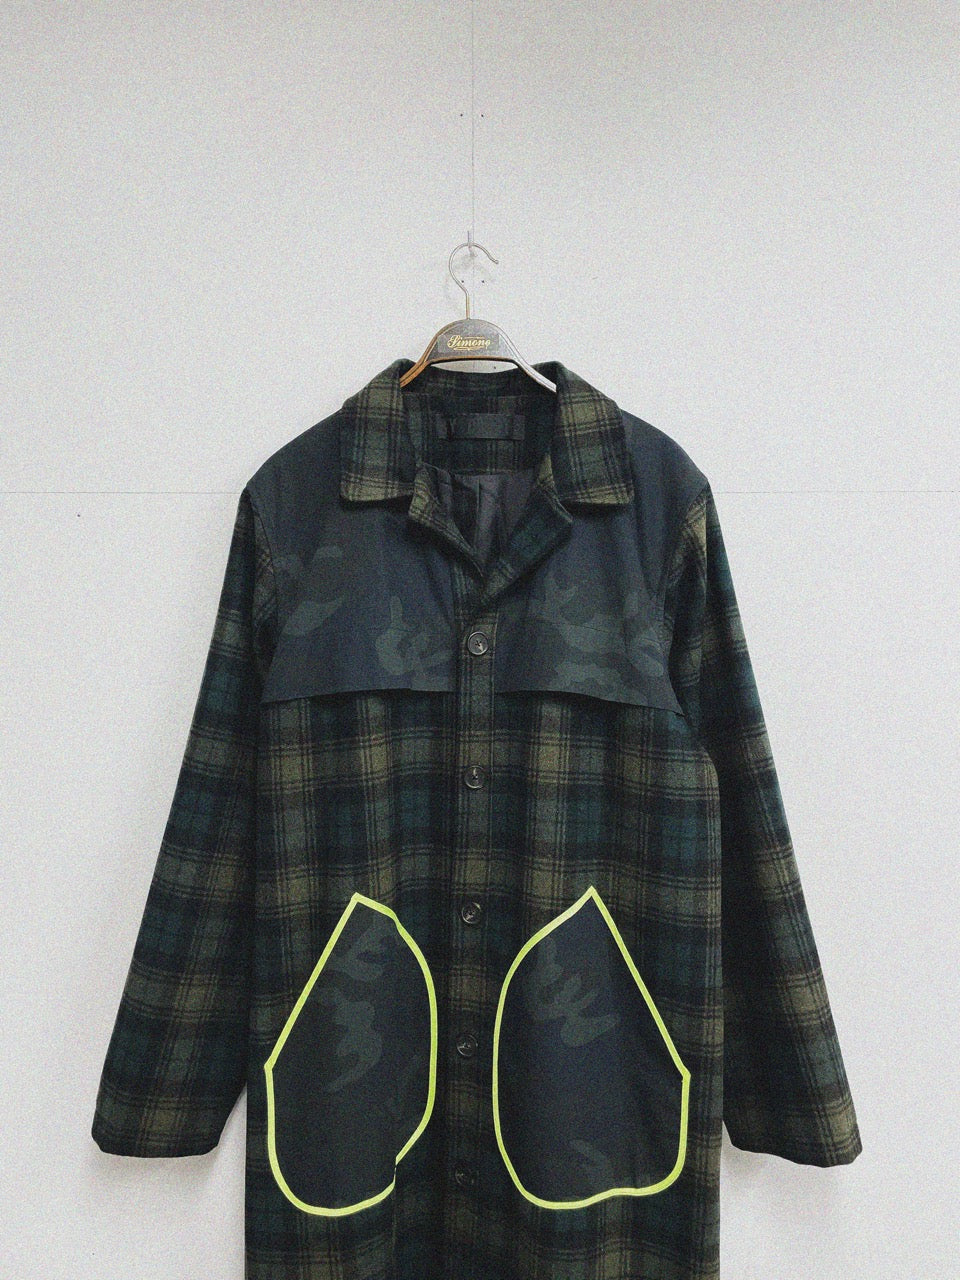 BIG & LONG FLASHER COAT by death